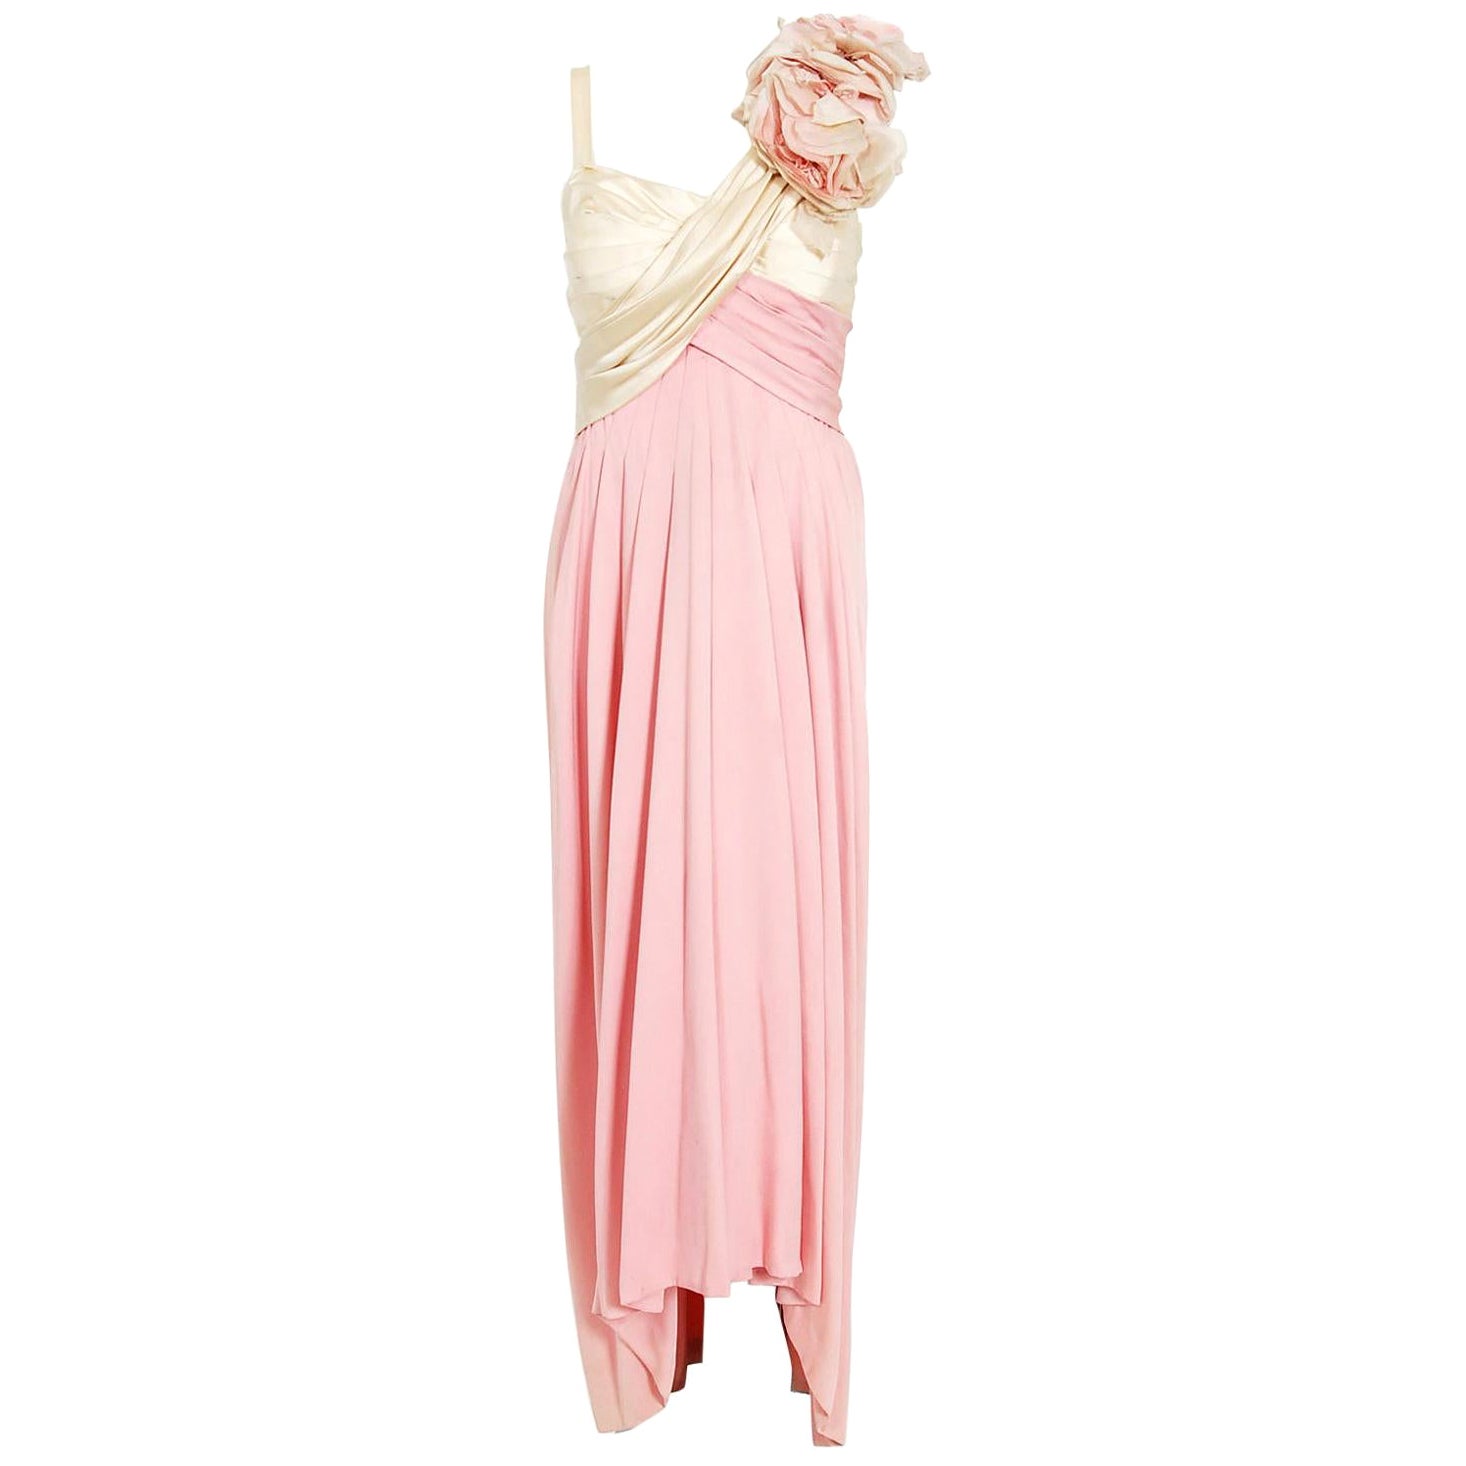 Vintage 1960's Film-Worn Pink Silk and Ivory Satin Floral Appliqué Draped Gown